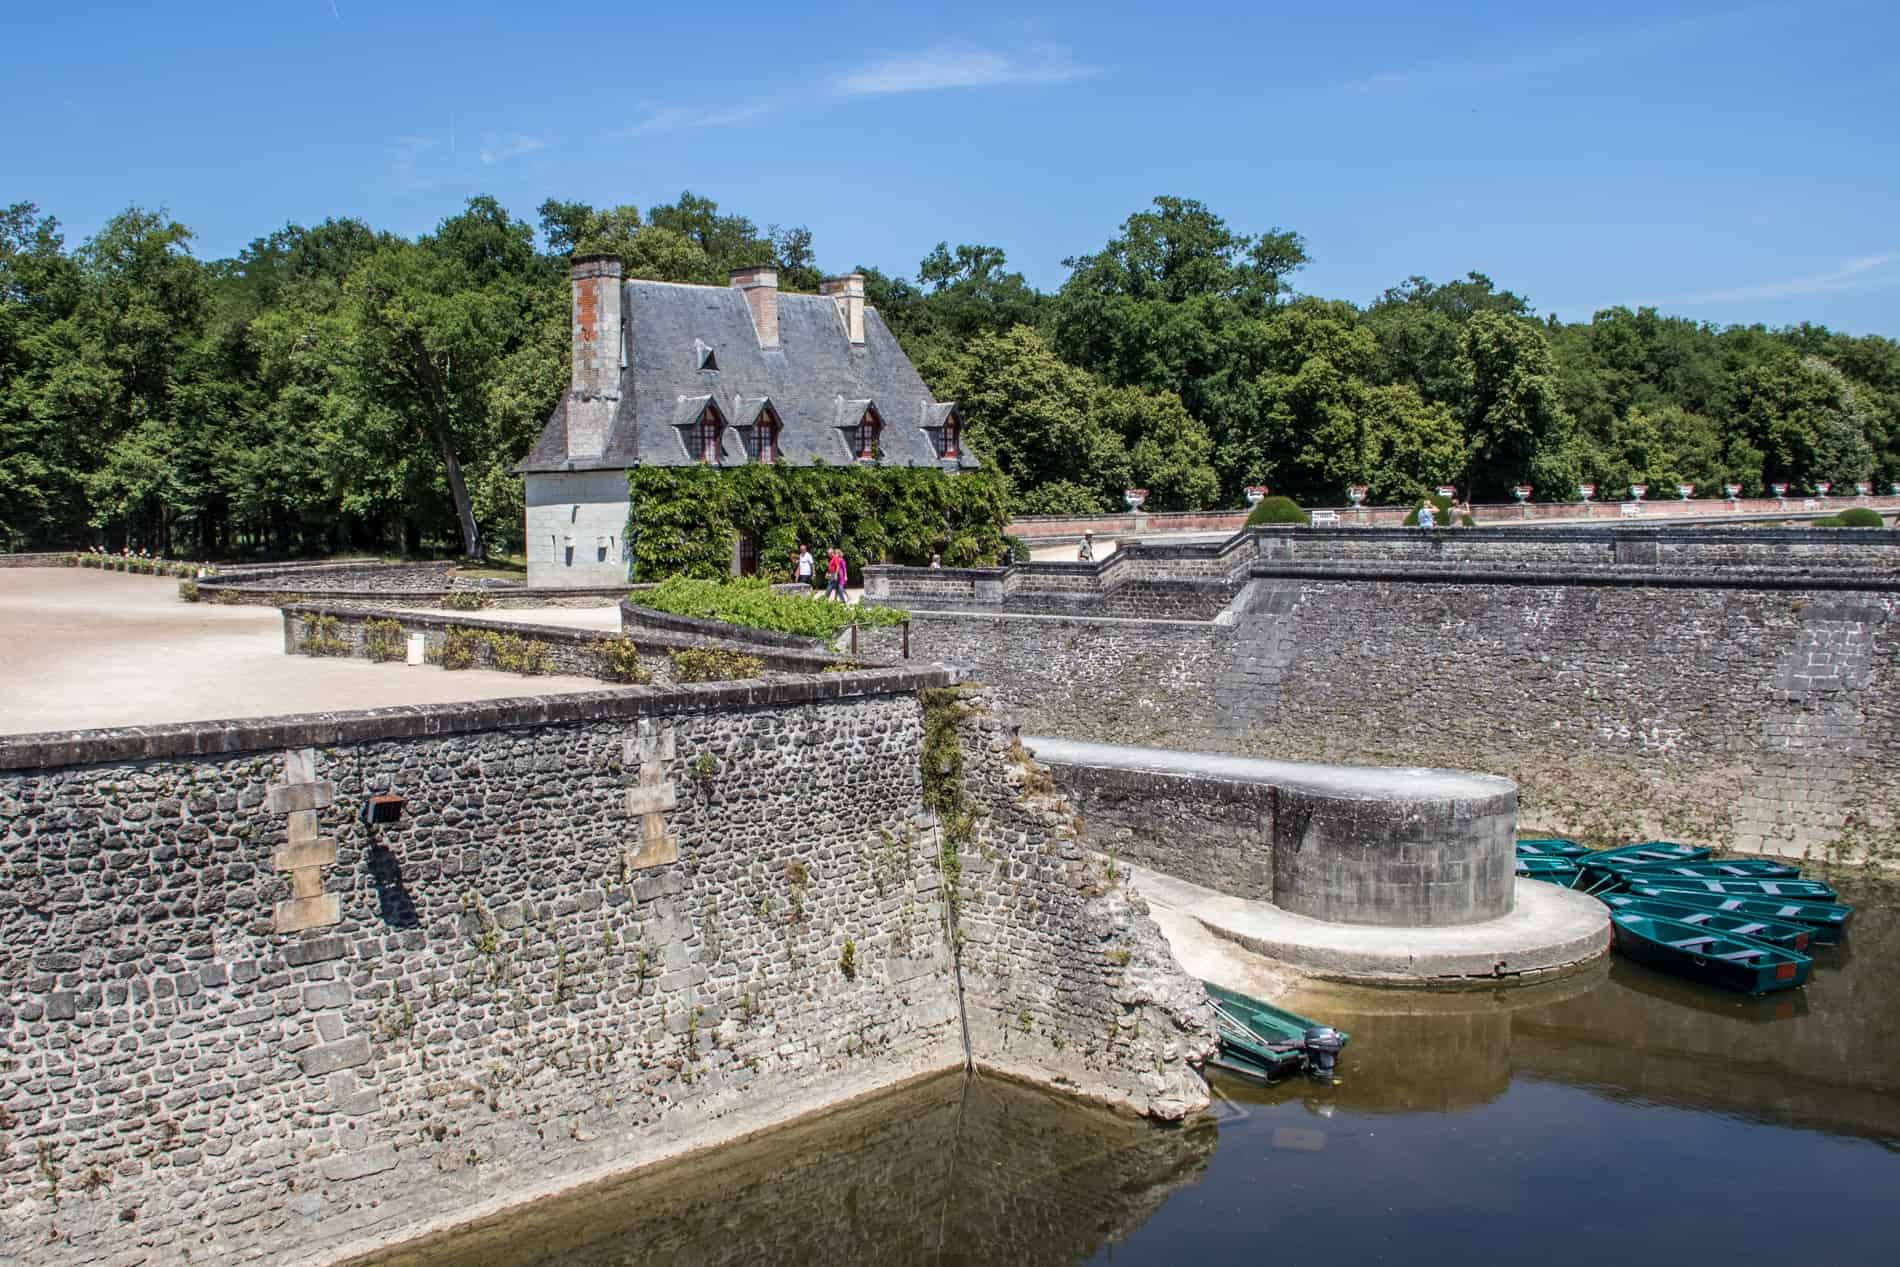 Green boats in the water below the old walls of Château de Chenonceau, Loire Valley. 